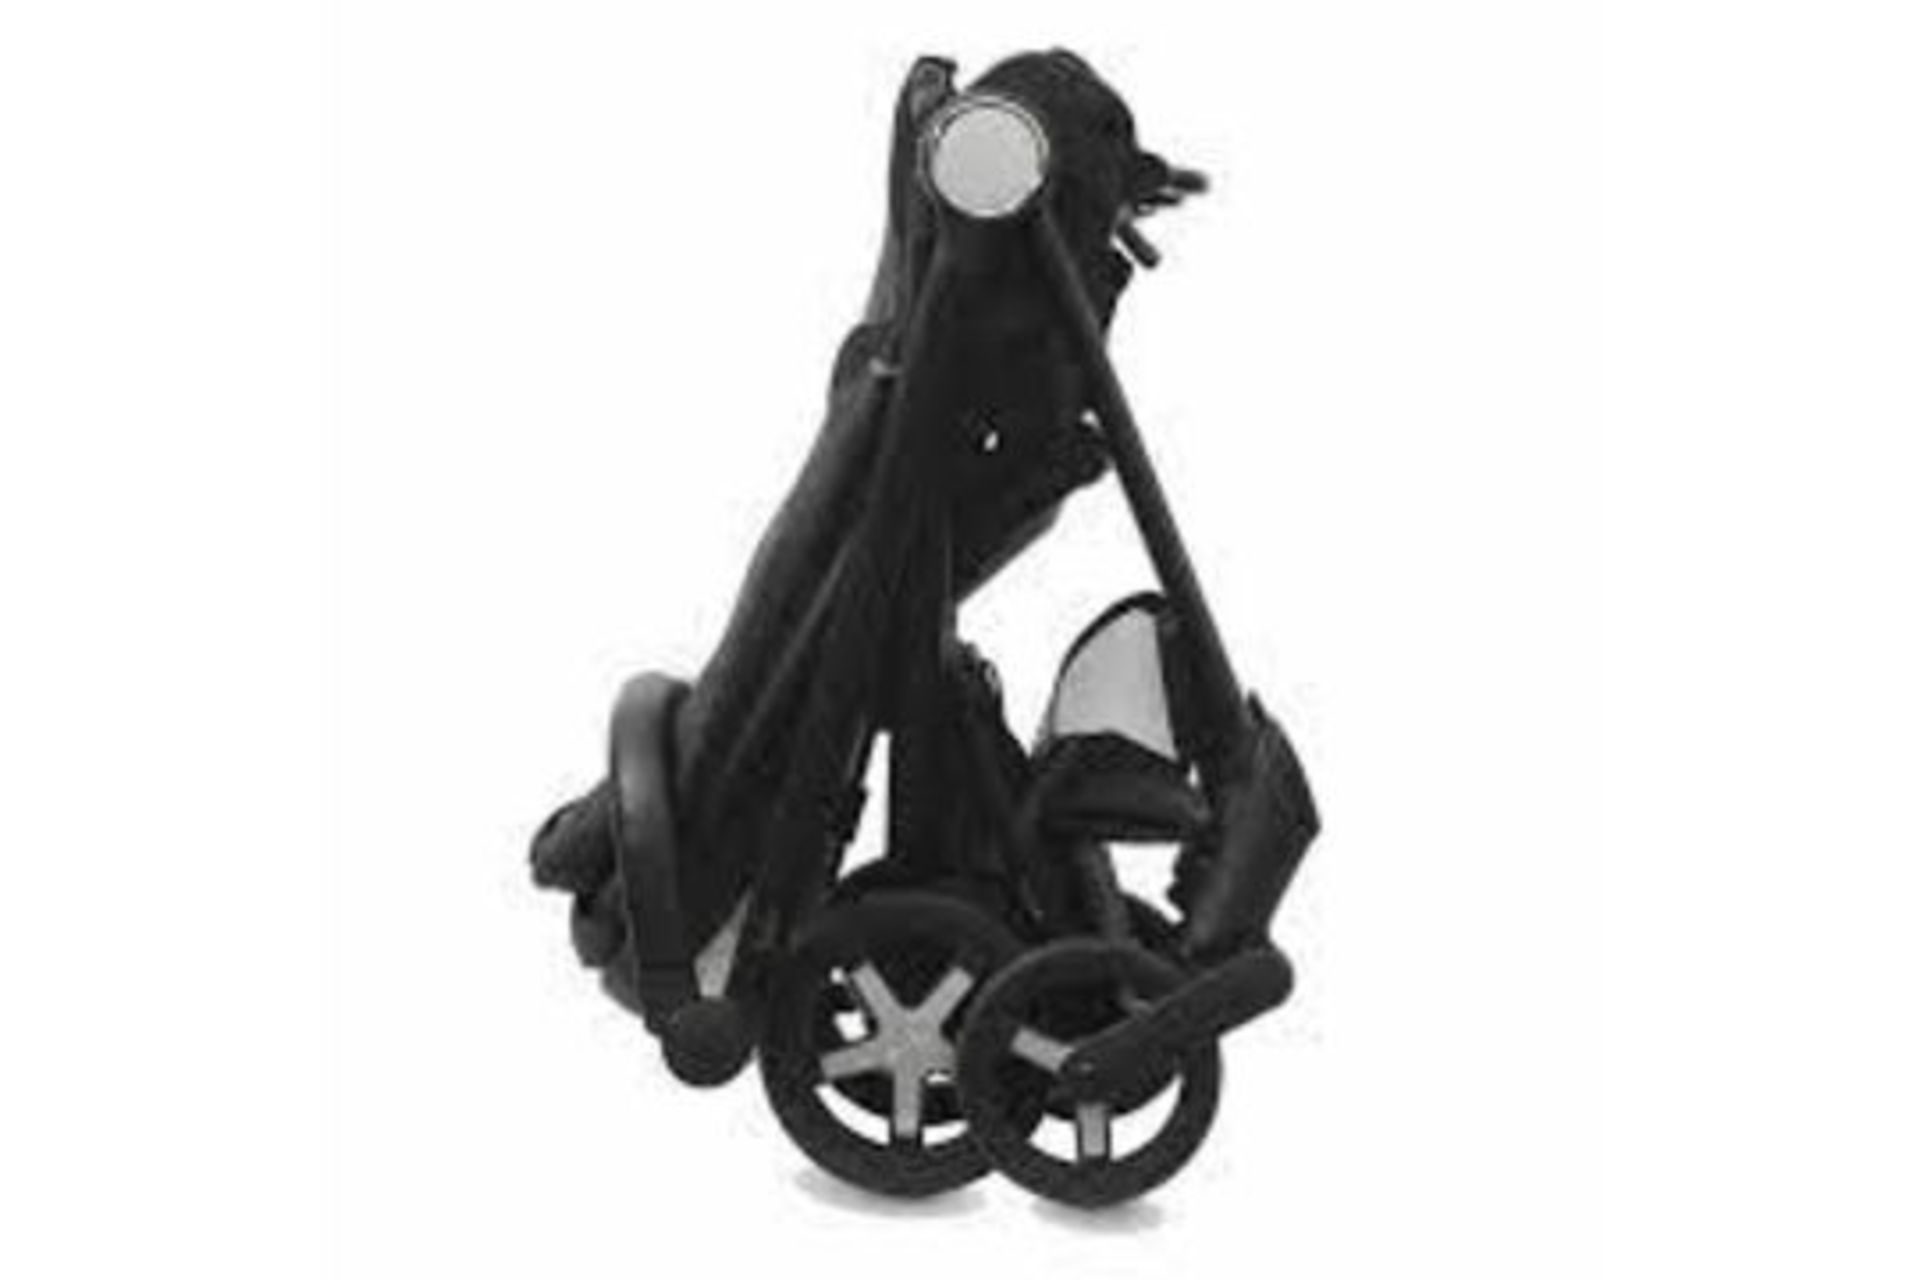 New Boxed Silver Cross Spirit 2 in 1 Pushchair-Onyx. Spirit is perfect for agile city living, - Image 4 of 4